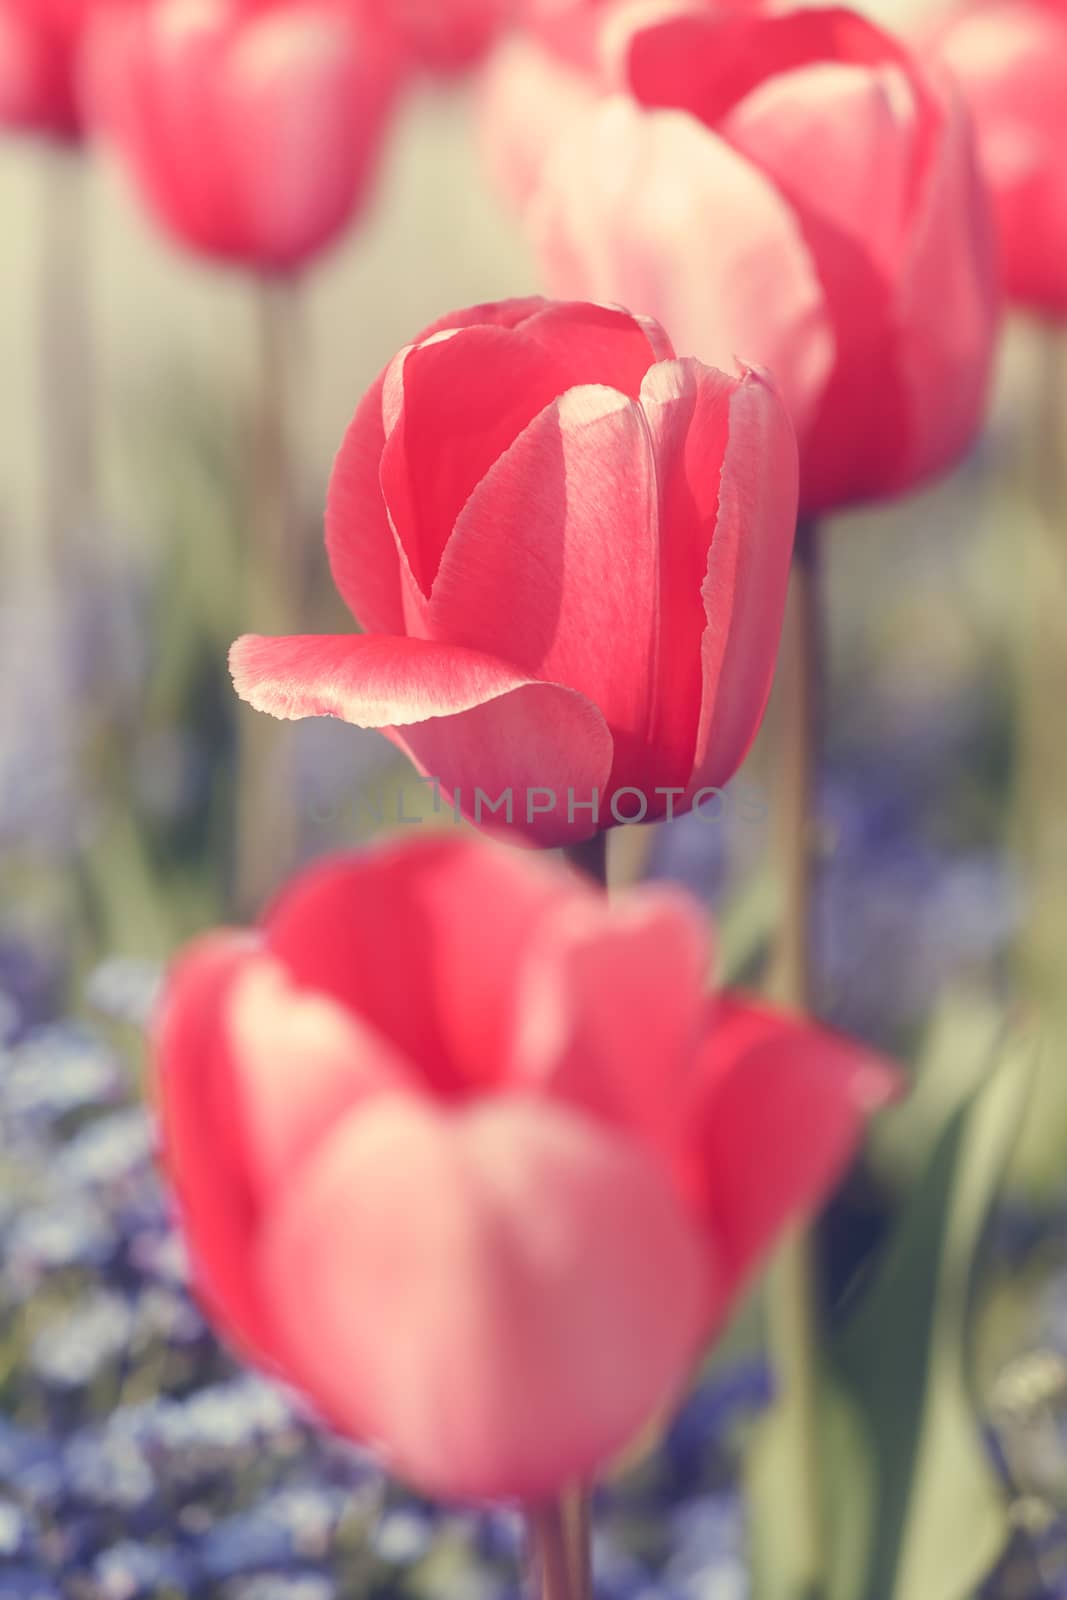 Red tulips by Slast20